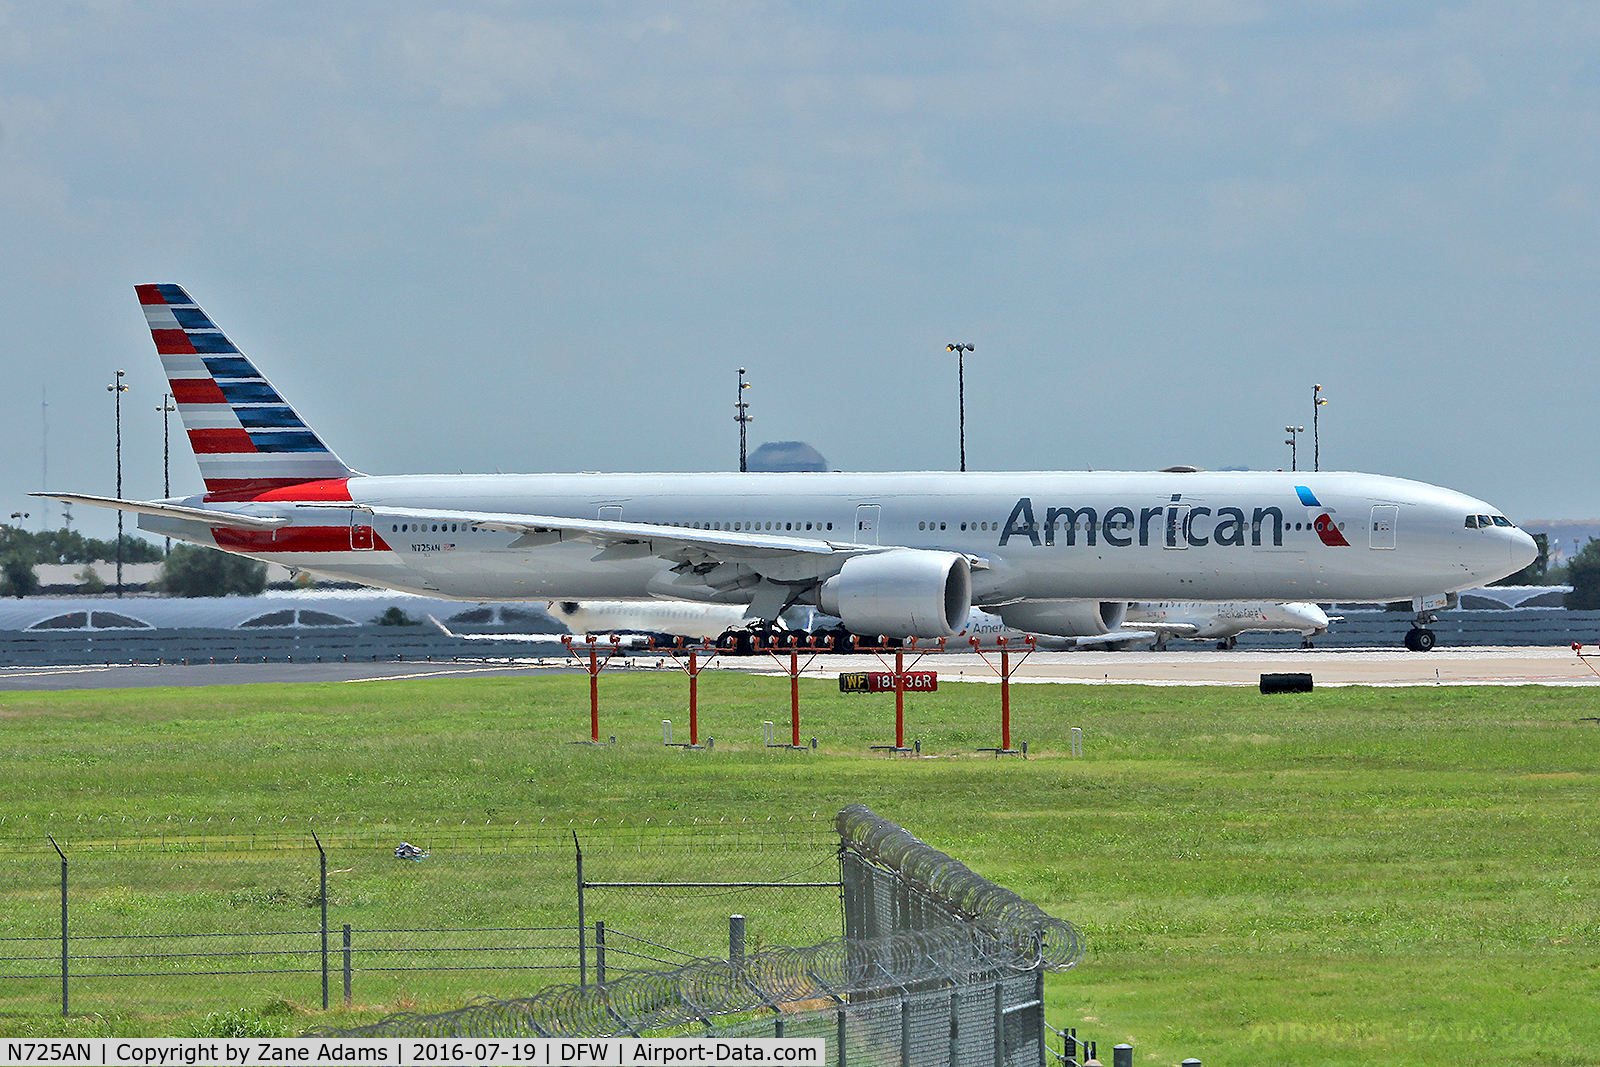 N725AN, 2013 Boeing 777-323/ER C/N 41666, American Airlines 777 about to depart DFW Airport